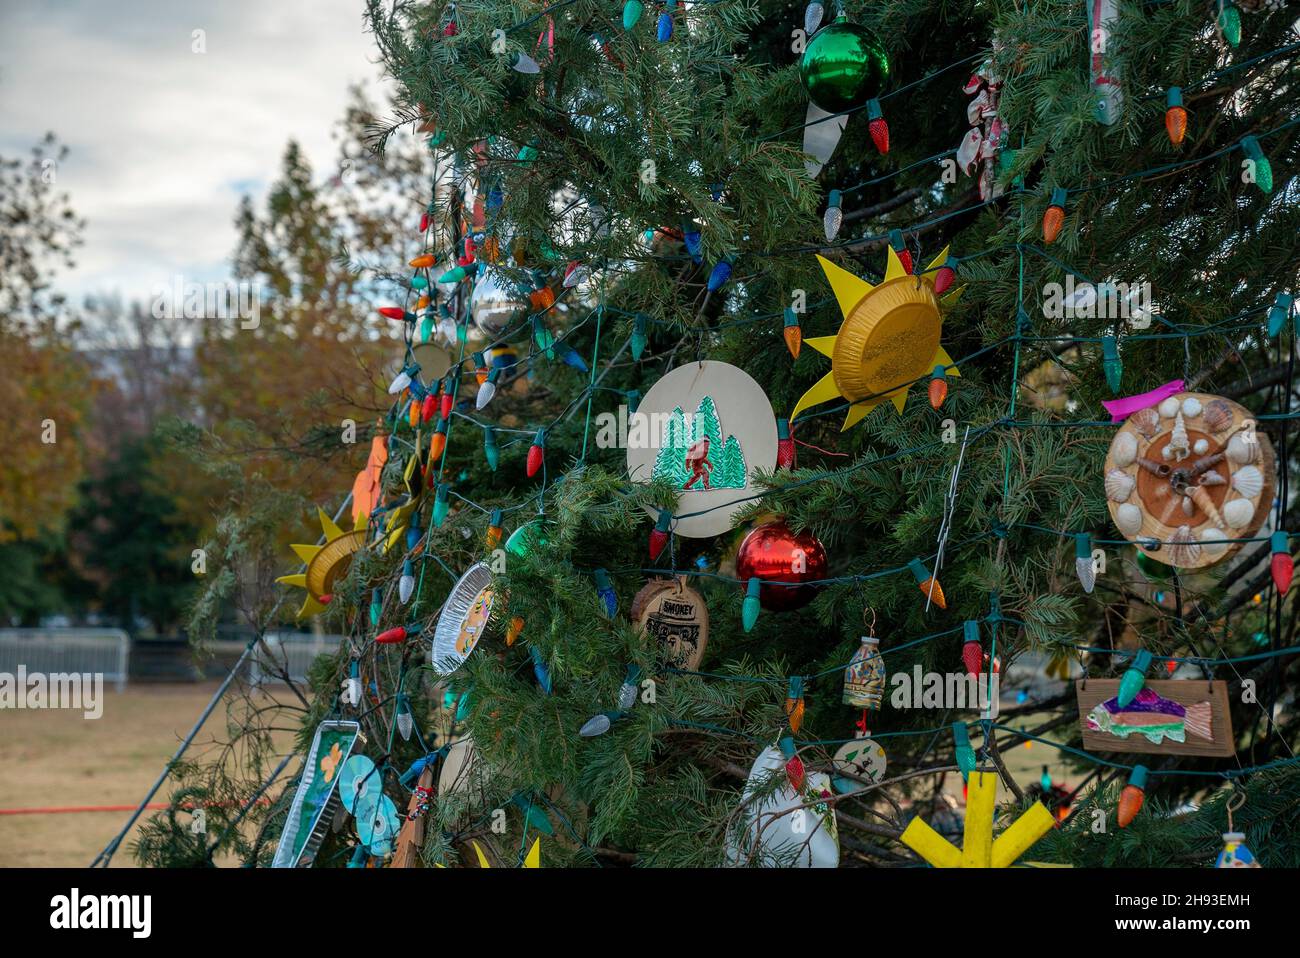 Washington, United States of America. 01 December, 2021. The U.S Capitol Christmas tree decorations including a Big Foot ornament before the lighting ceremony on the West Lawn of the Capitol December 1, 2021 in Washington, DC. The tree is an 84-foot tall White Fir from the Six Rivers National Forest in California.   Credit: Tanya E Flores/USFS/Alamy Live News Stock Photo